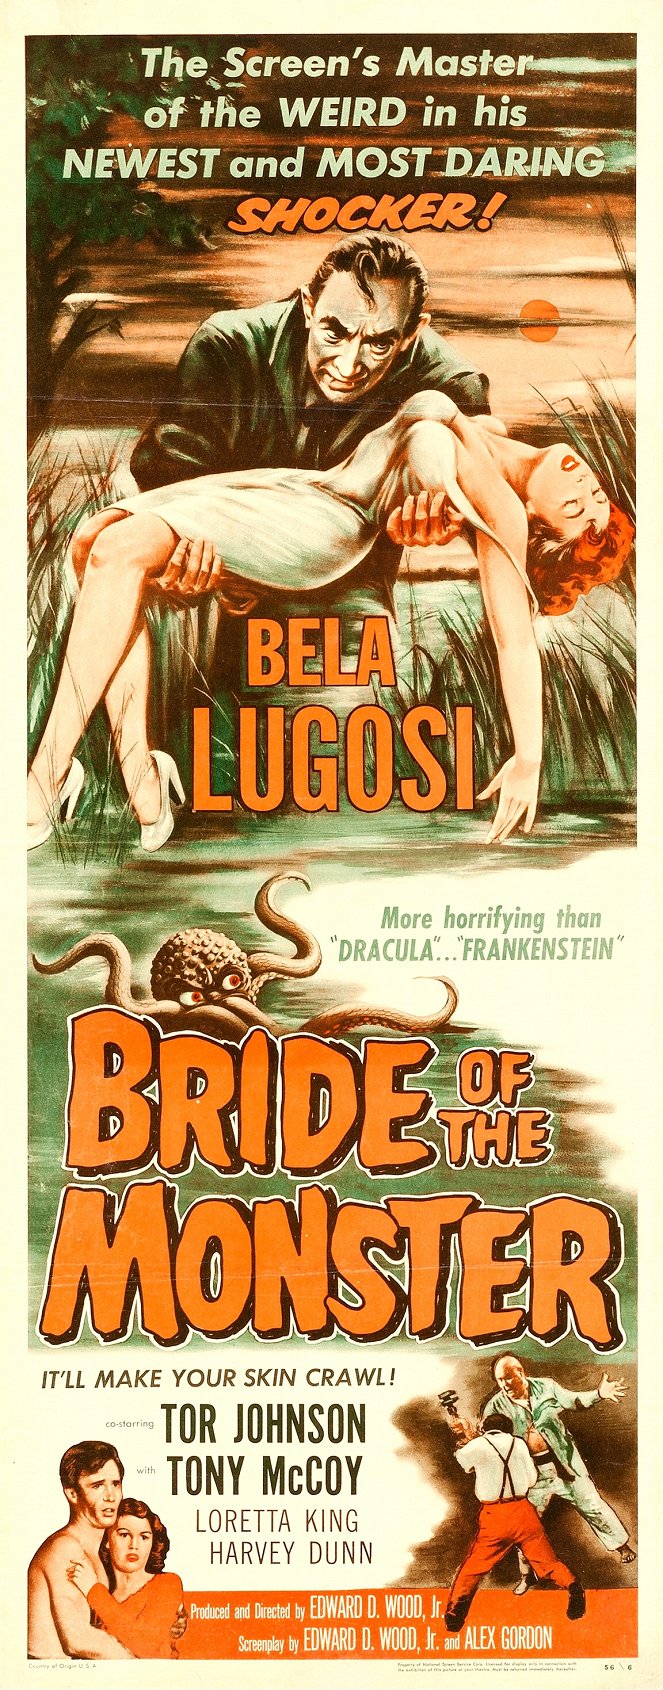 Bride of the Monster - Posters